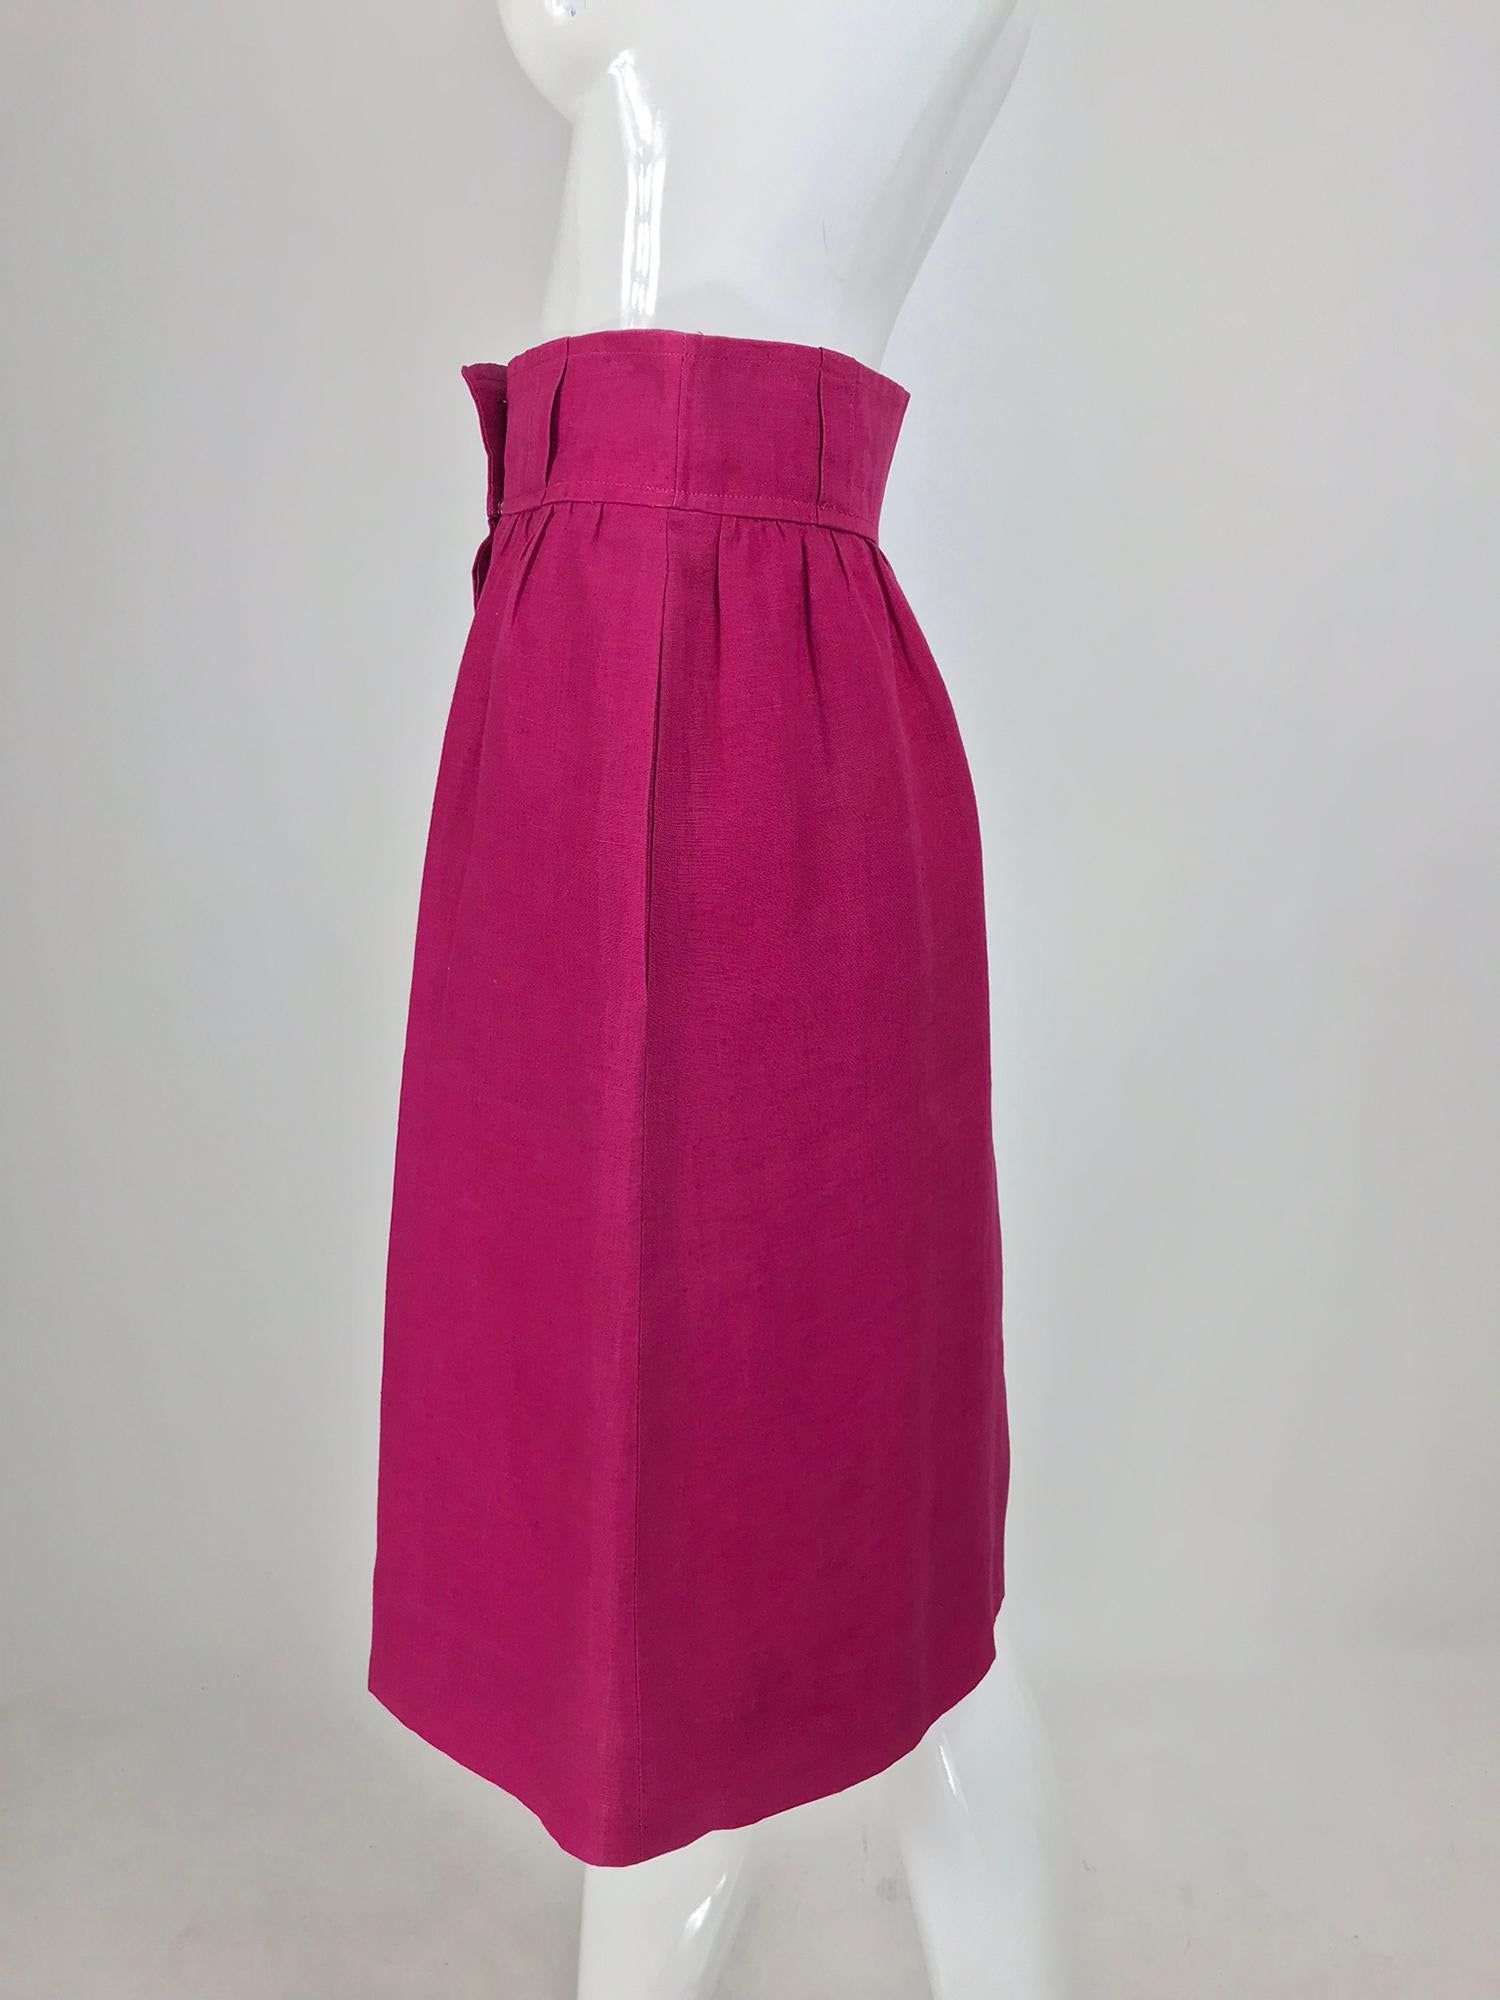 Givenchy Hot Pink Linen Skirt 1980s 5